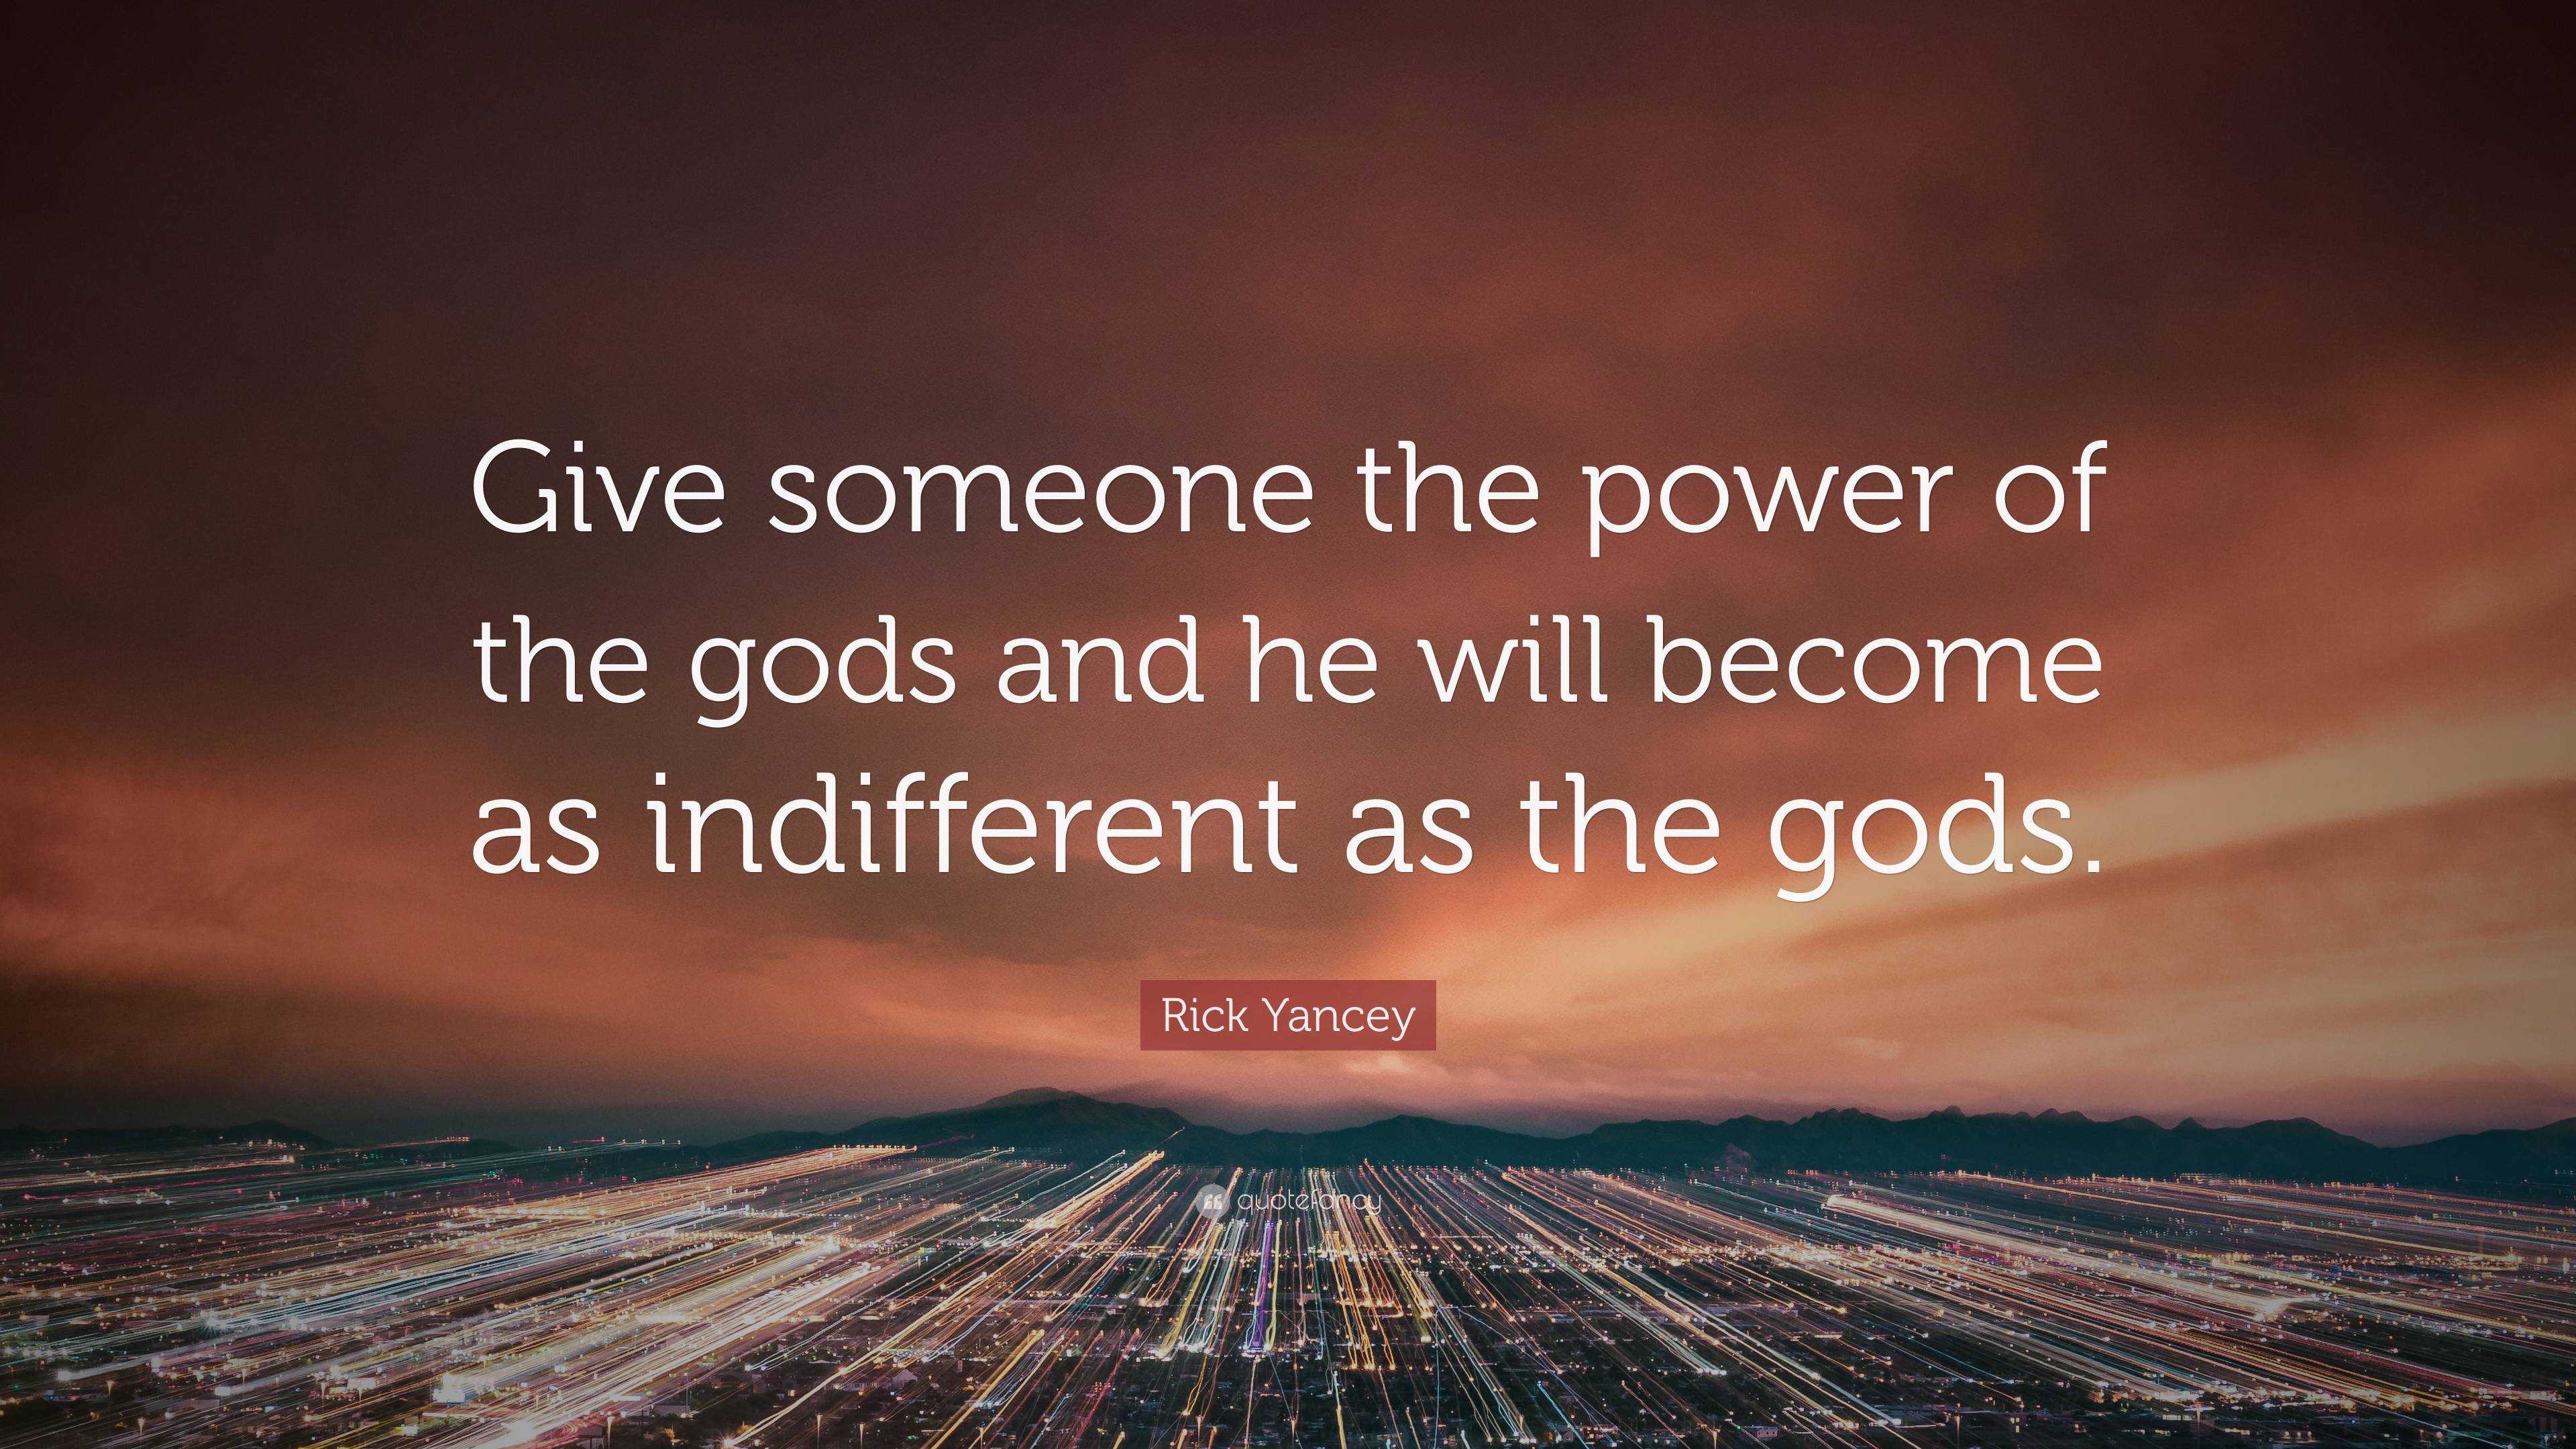 Rick Yancey Quote: “Give someone the power of the gods and he will ...